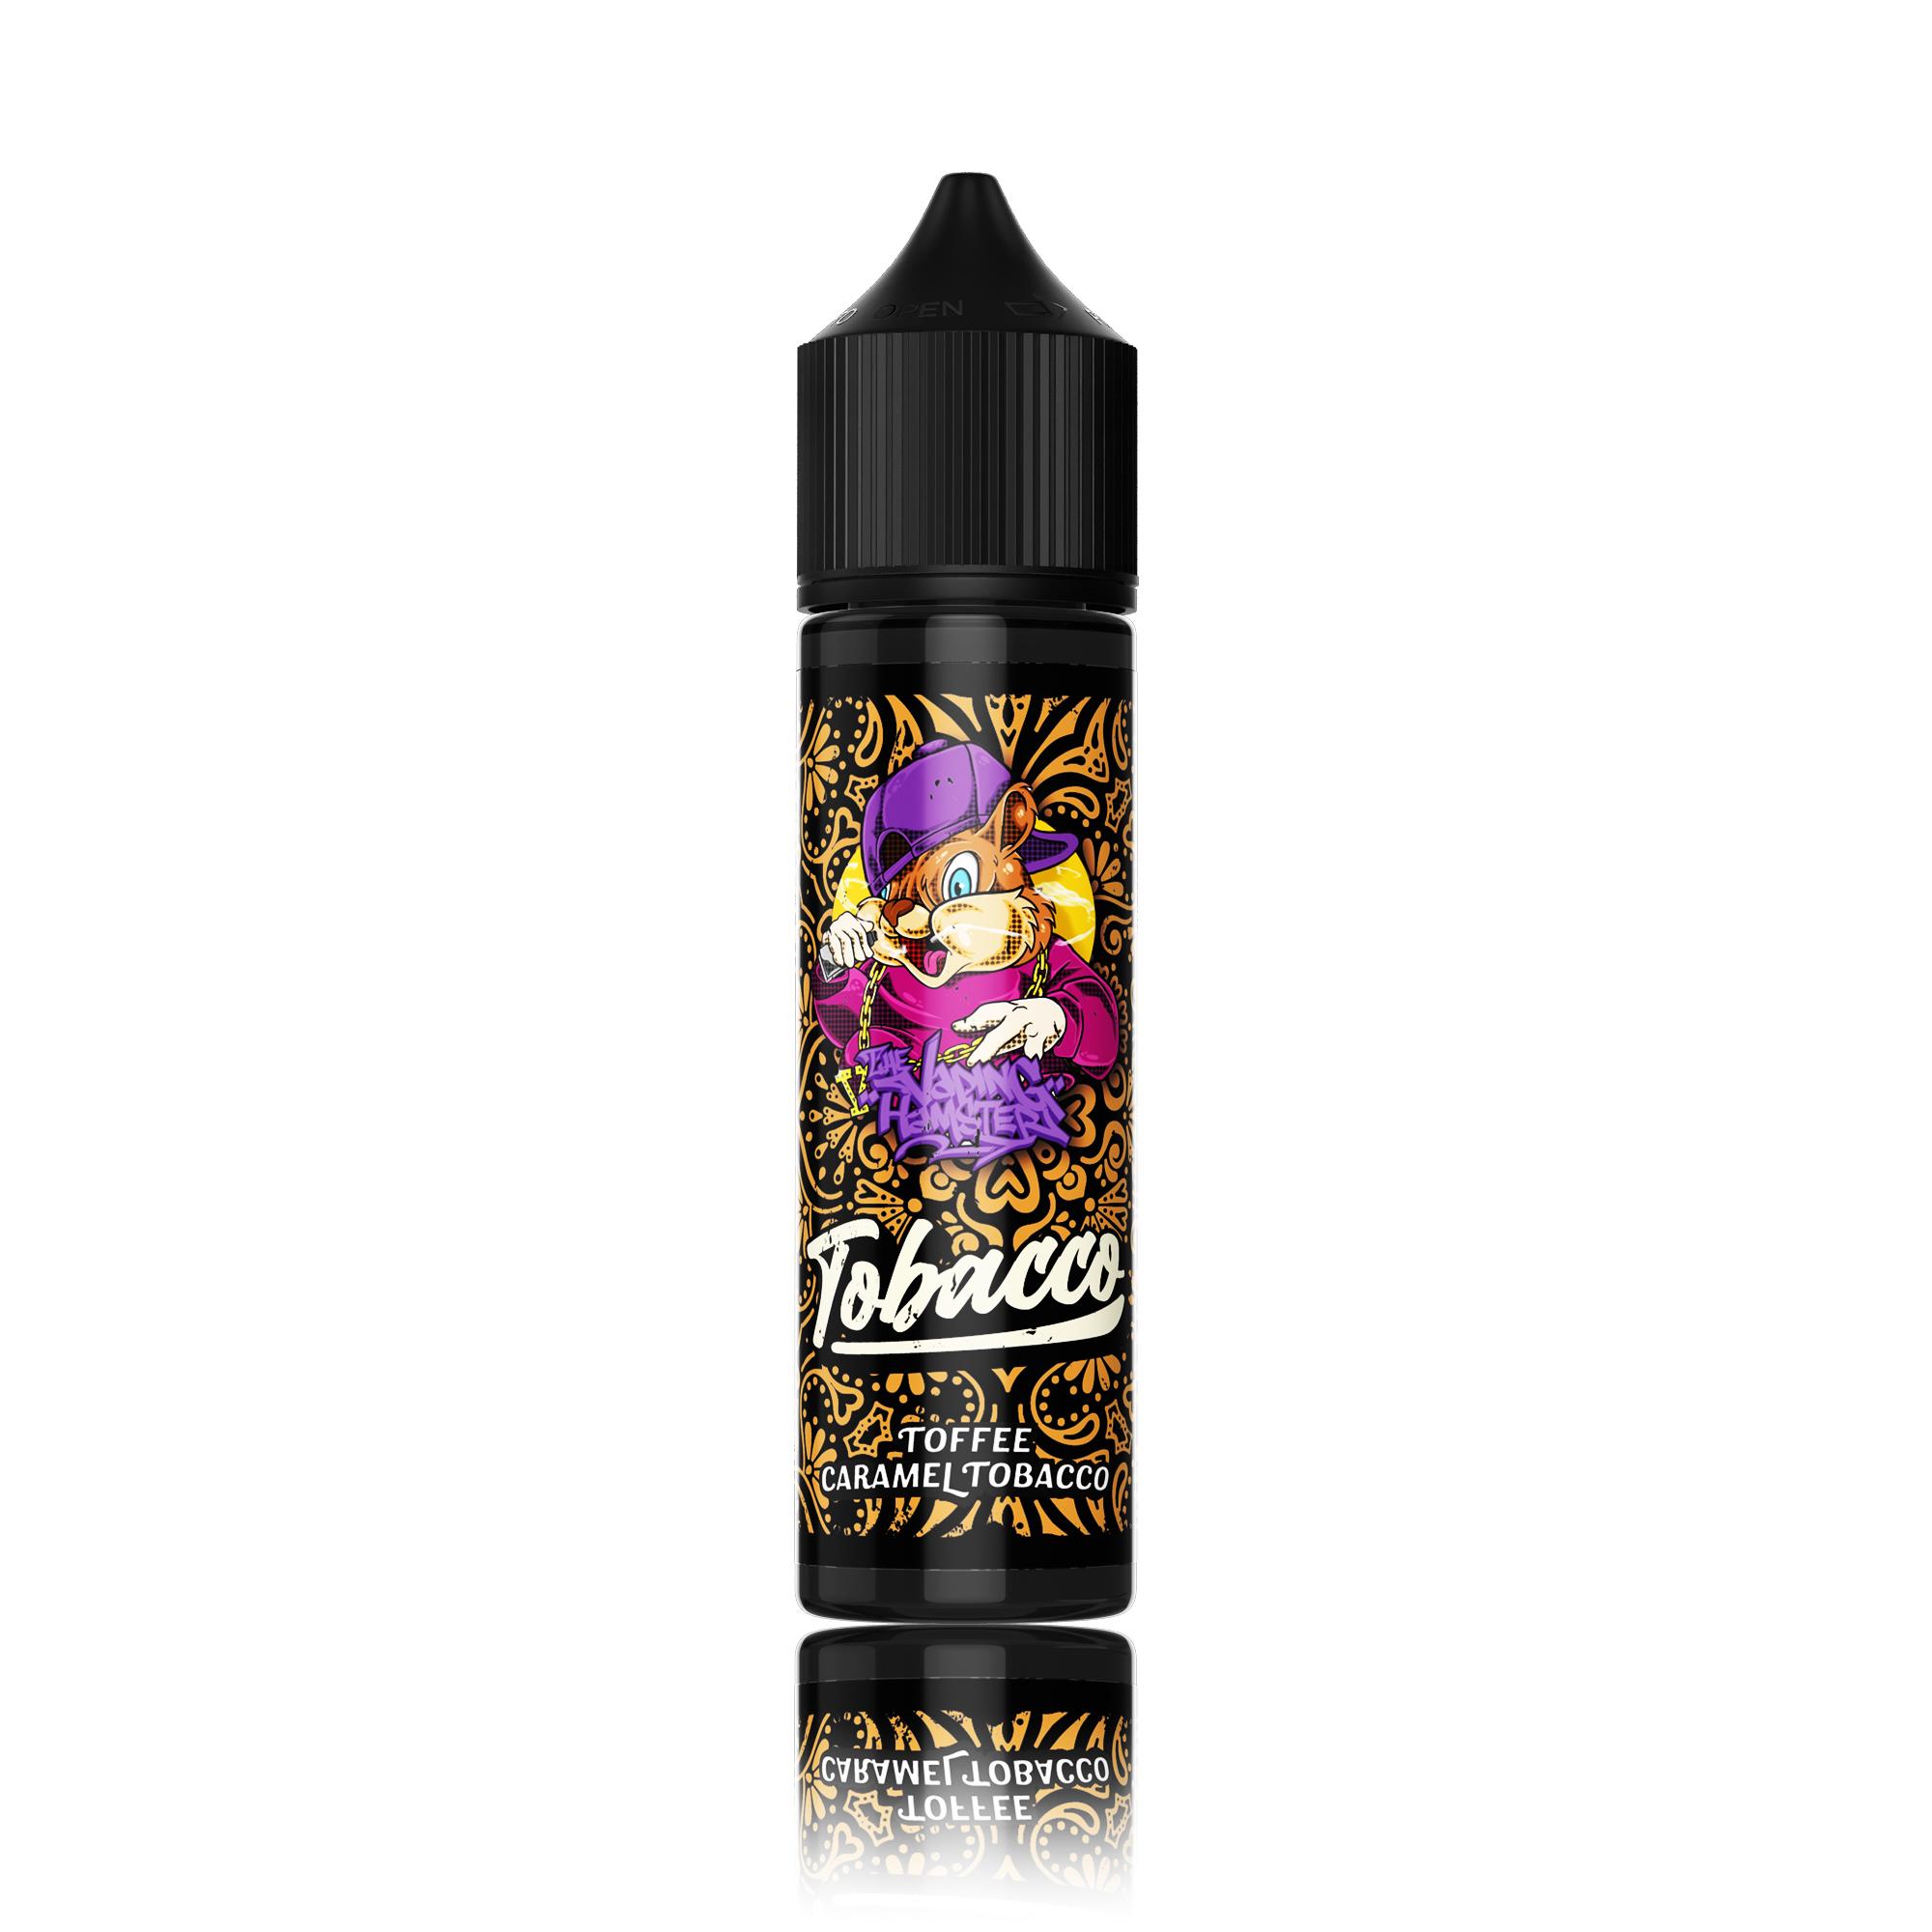 Toffee Caramel Tobacco by The Vaping Hamster